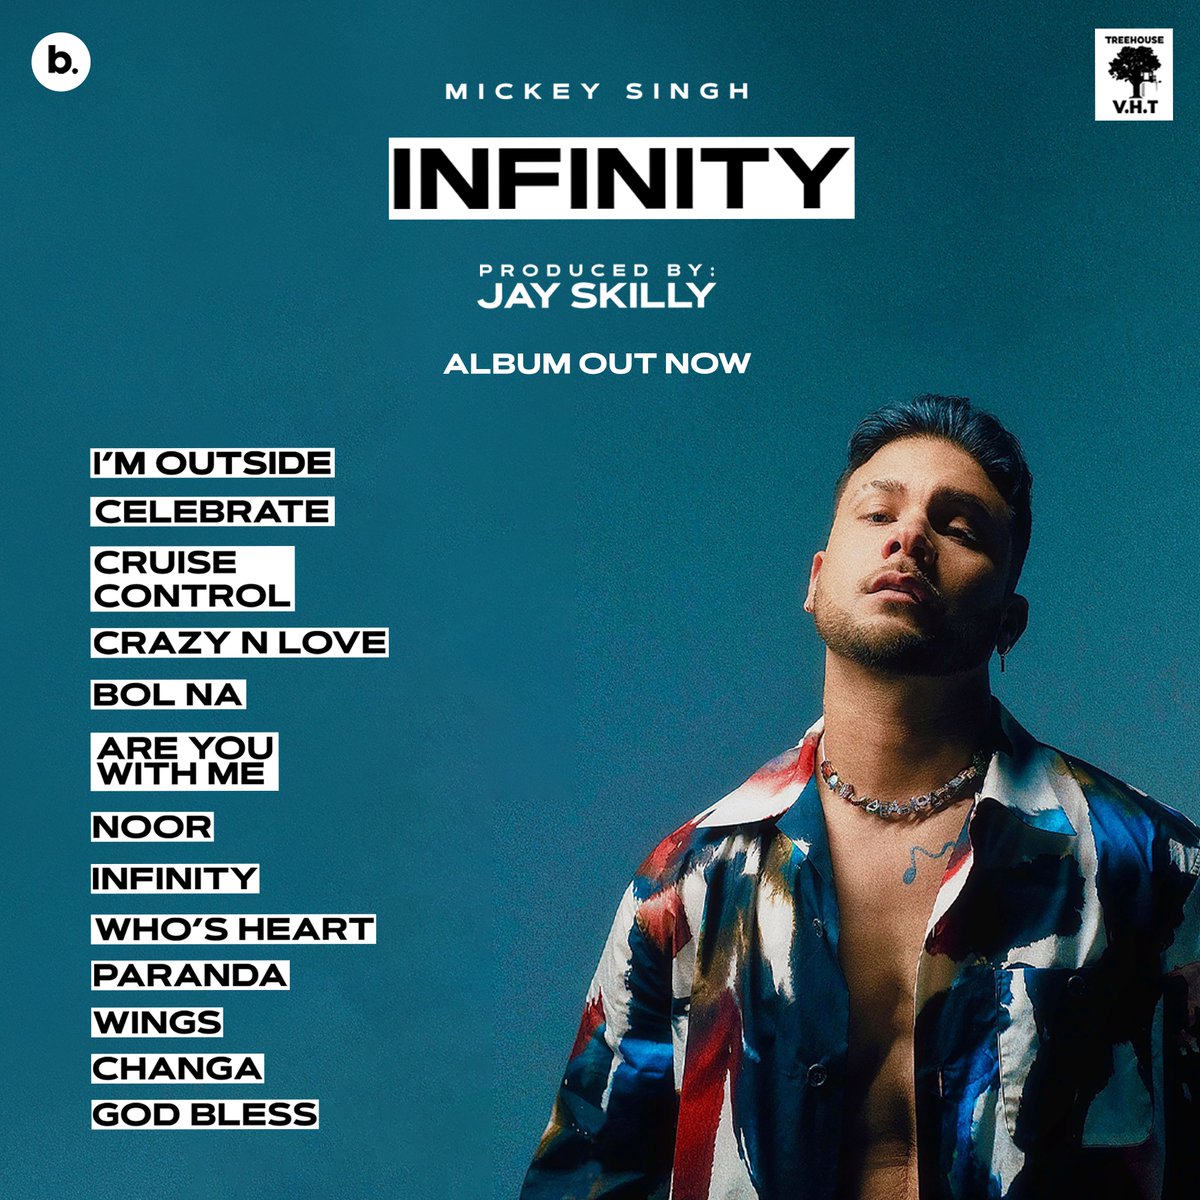 #INFINITY Album by Mickey Singh is OUT NOW & Streaming on all platforms! Do Check It Out!♾⚡️

🔗mickeysingh.bfan.link/infinity-album

__
#mickeysingh #Album #OutNow #Punjabi #PunjabiMusic